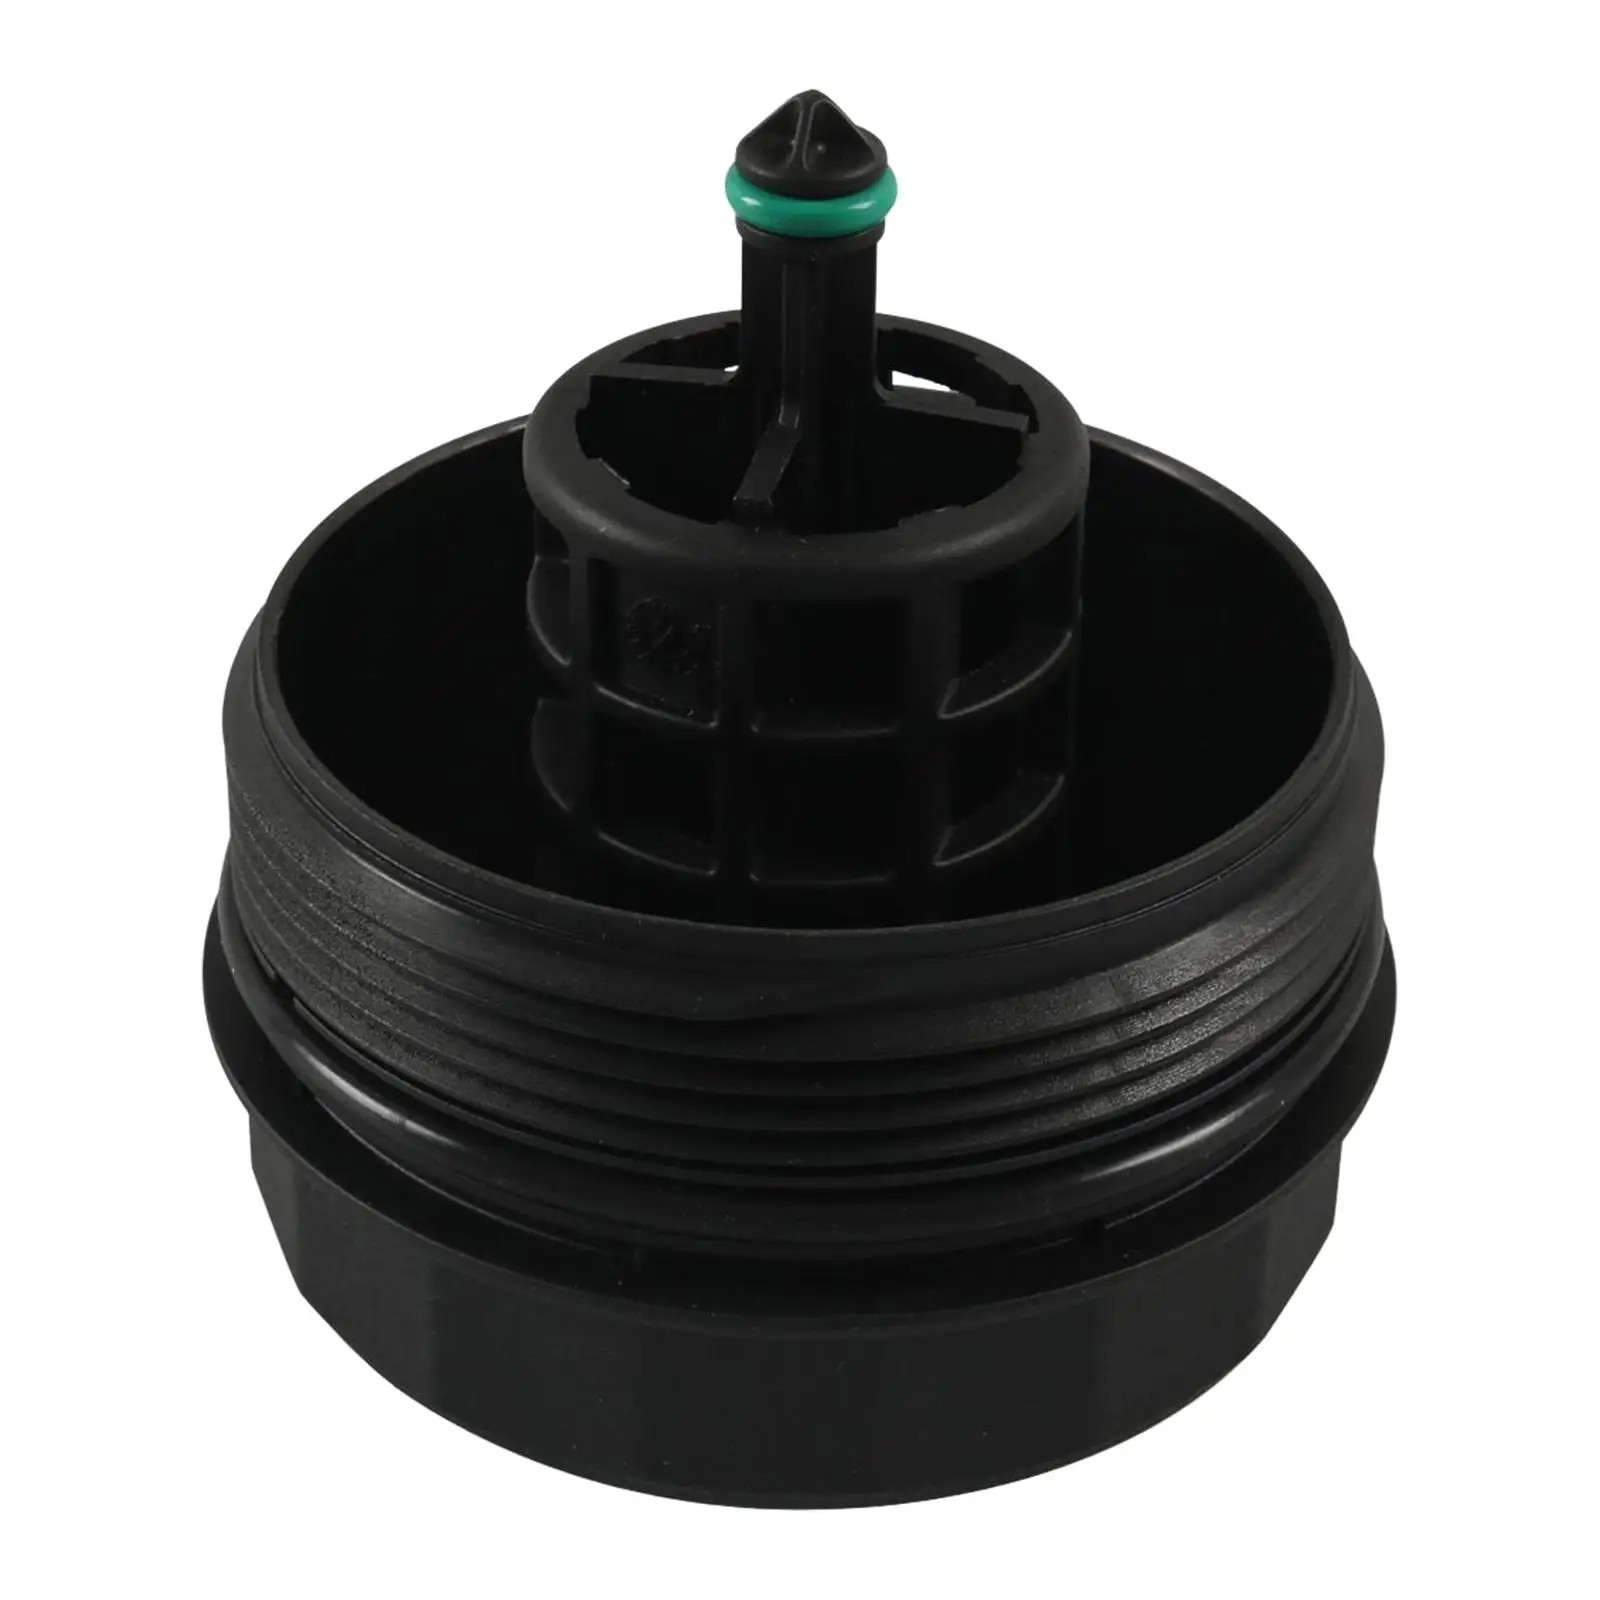 Oil Filter Housing Cover Caps 11427525334 Fit for bmw